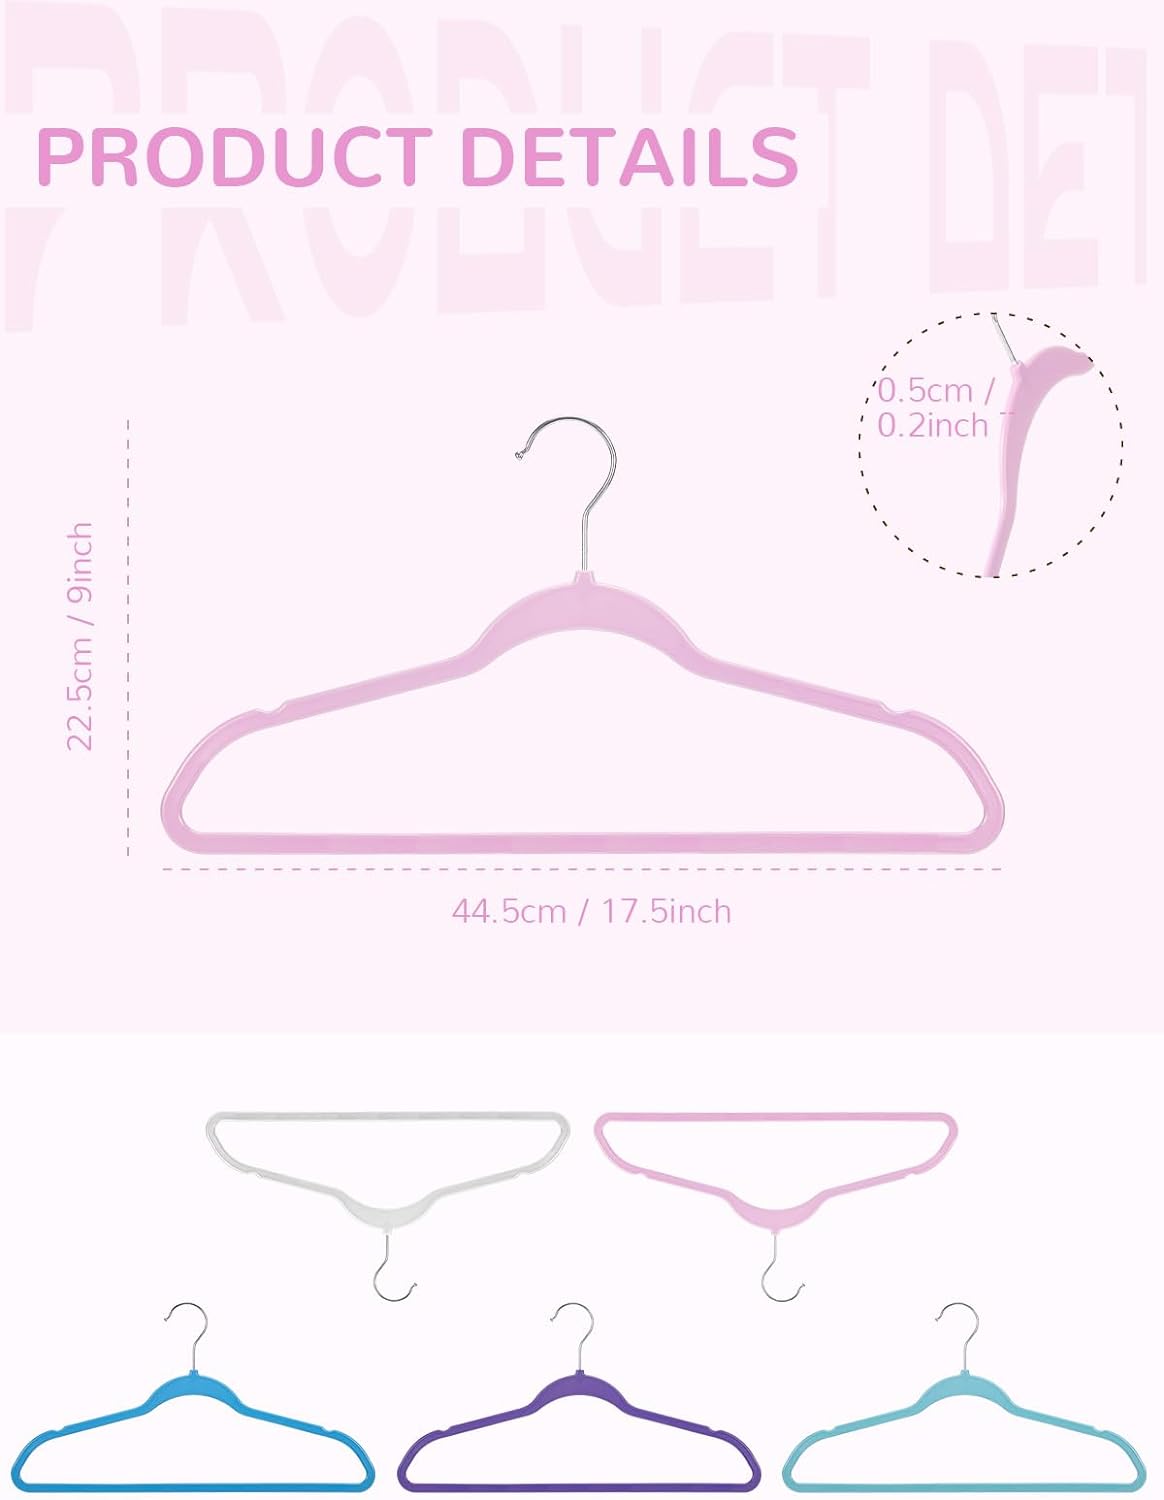 HOUSE DAY 17.5 Inch Plastic Hangers Pink 20 Pack